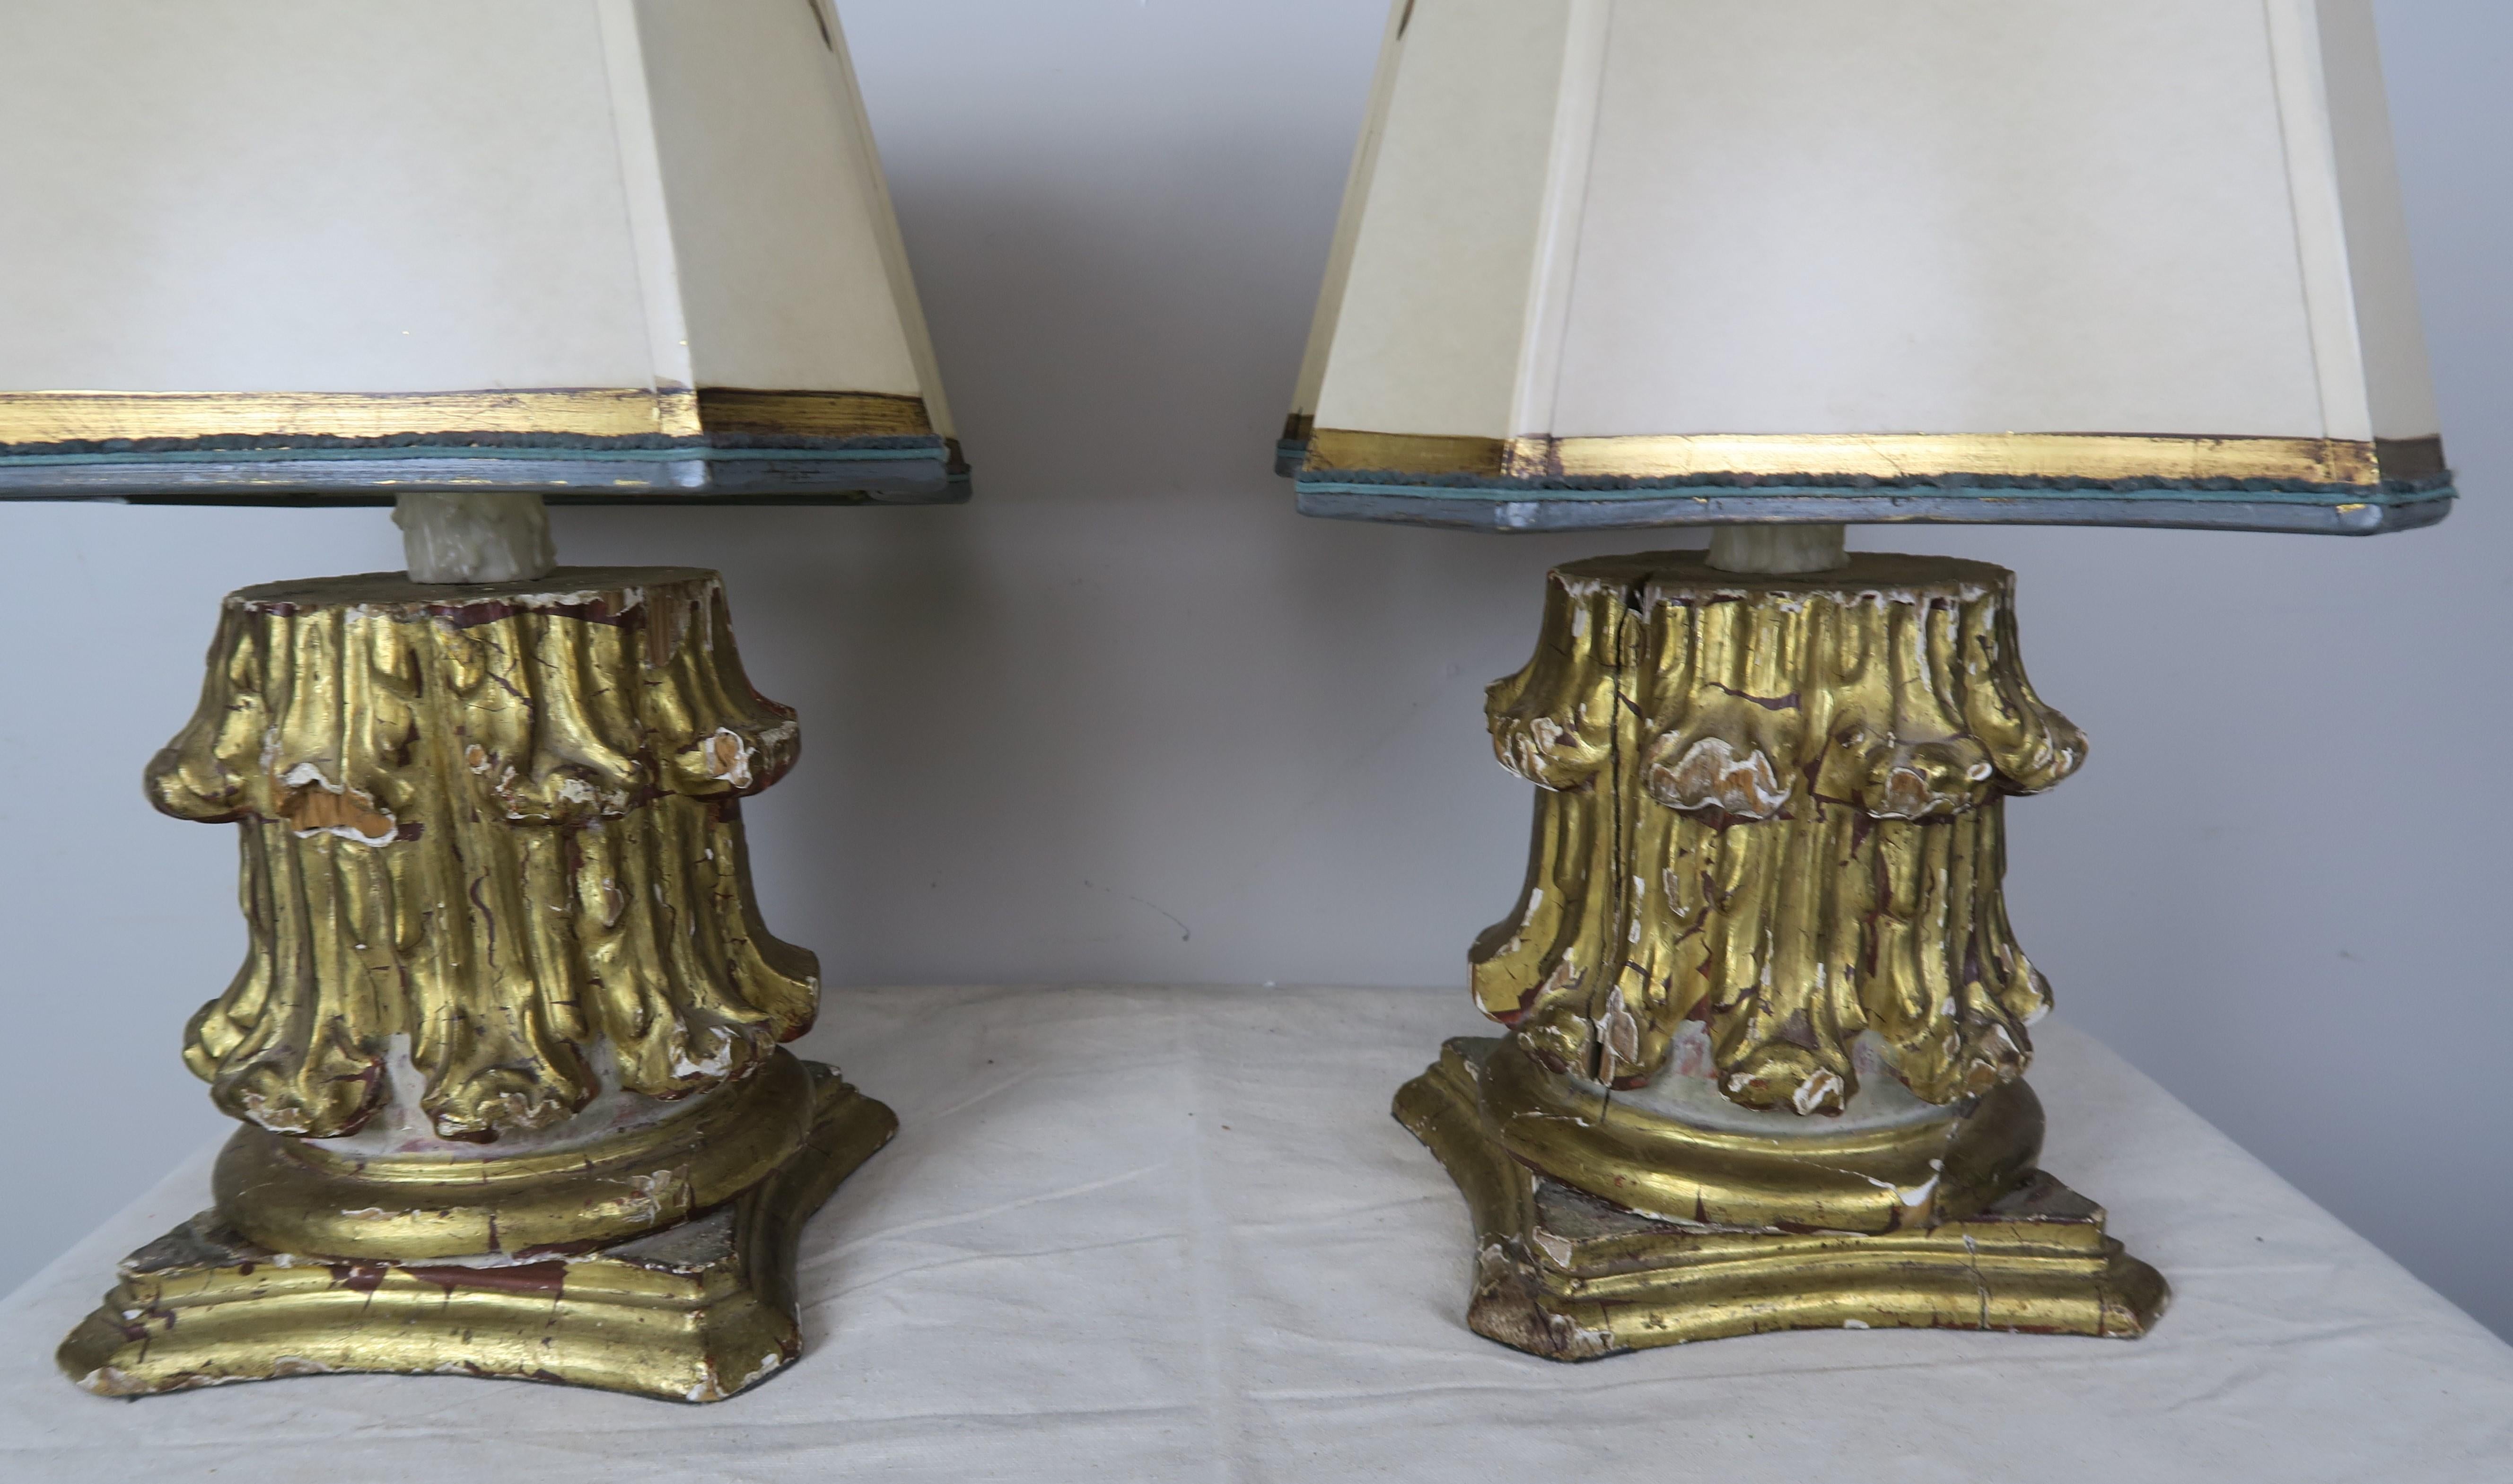 Pair of custom lamps made with 19th century Italian carved giltwood capitals mounted into contemporary lamps and crowned with custom gold detailed hand painted parchment shades in unique square shape to coordinate with the shape of lamp bases. The